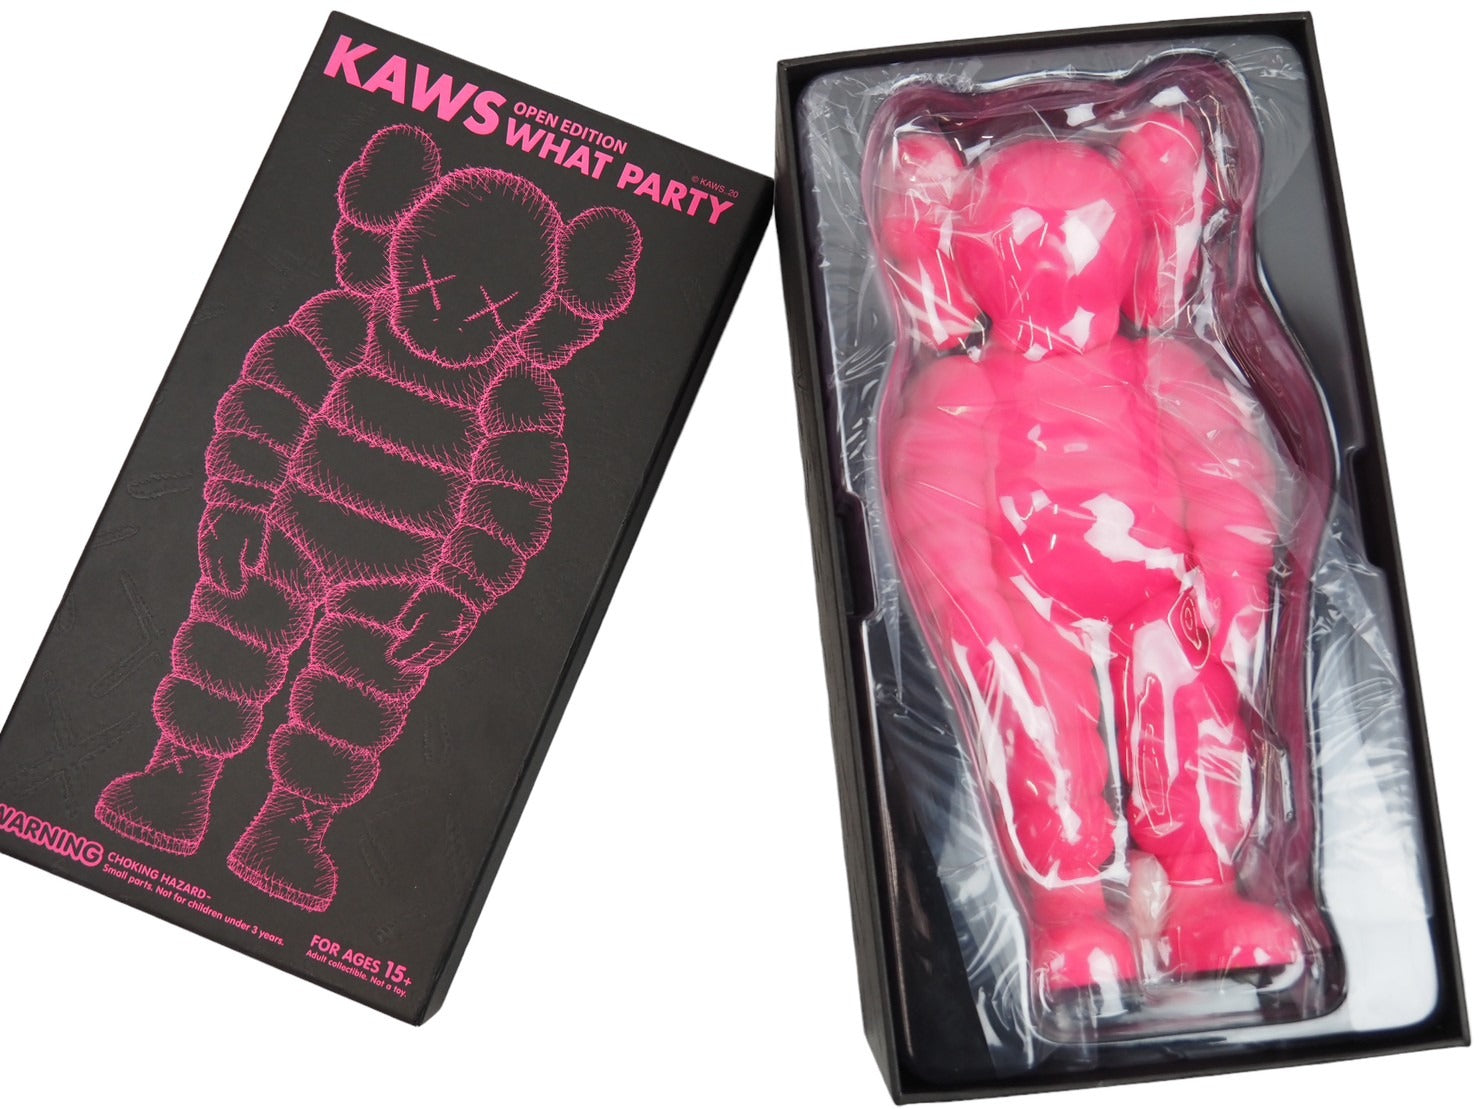 Kaws What Party Pink ピンクエンタメ/ホビー